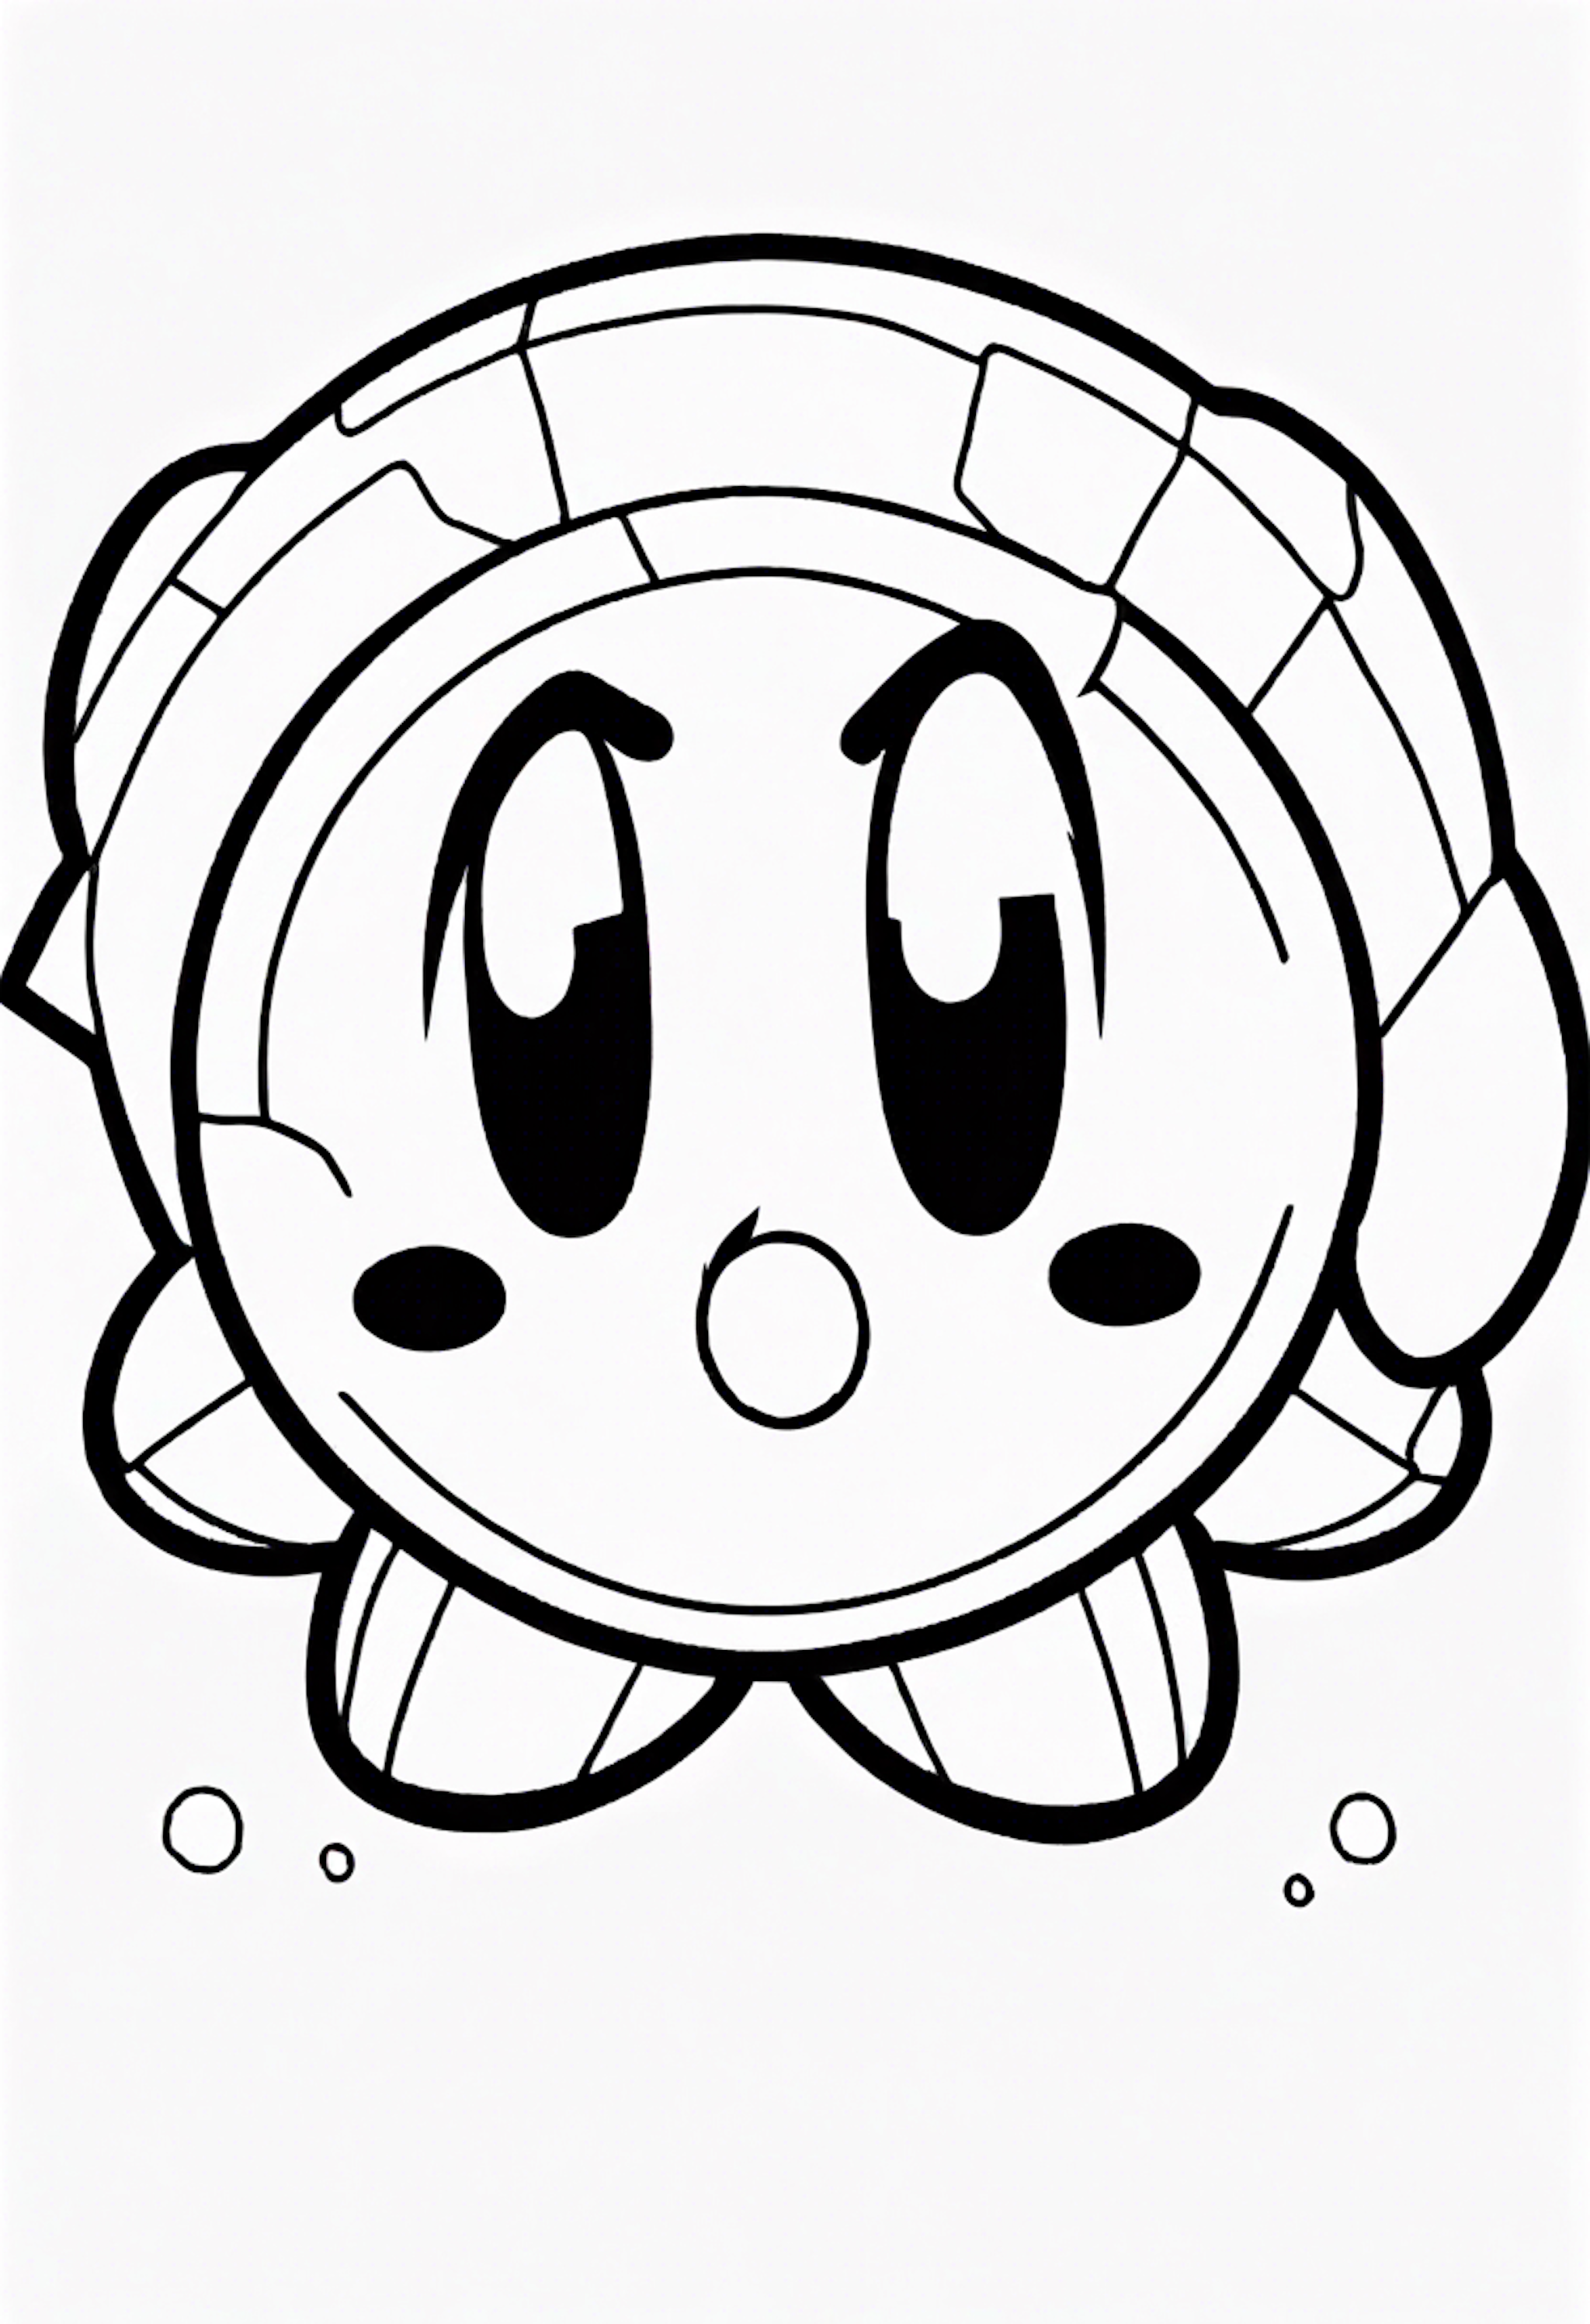 A coloring page for 1 Kirby coloring pages